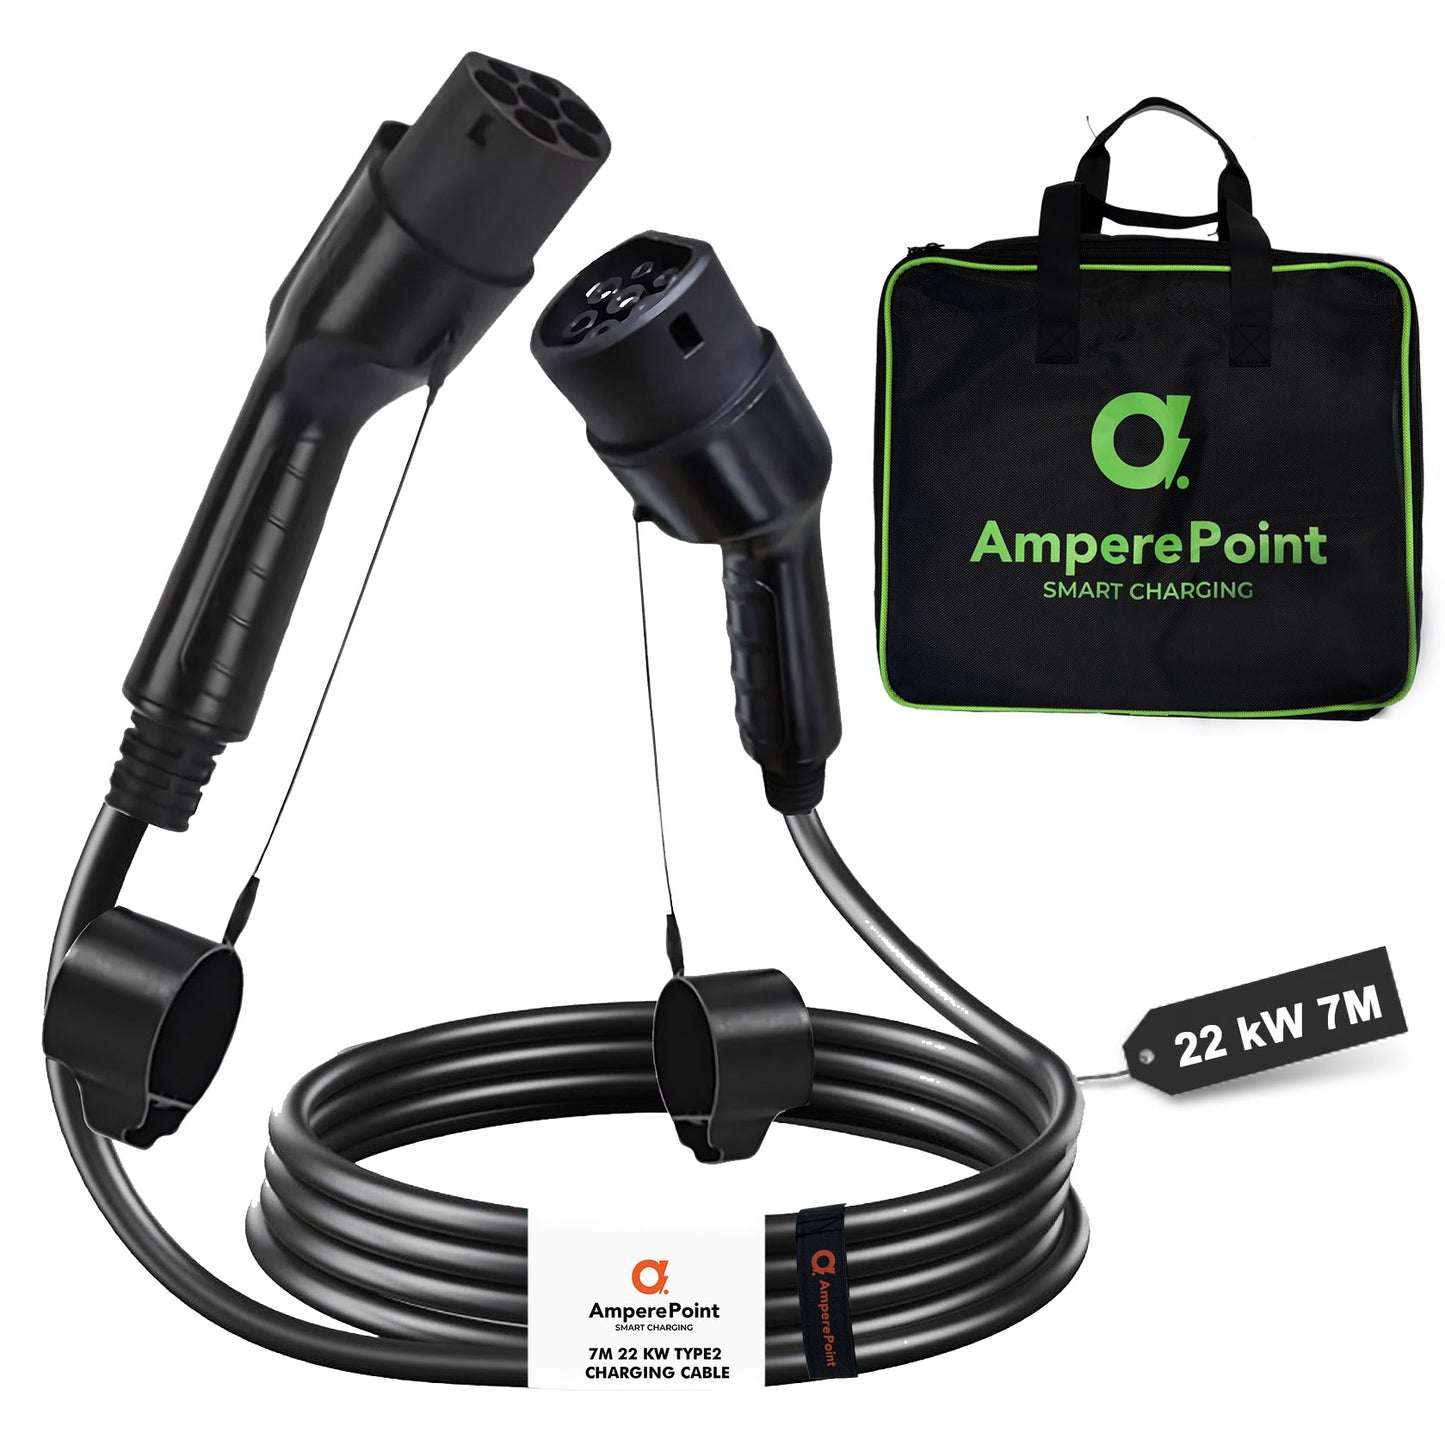 Charging cable Type 2 32A / 22 kW 7M bag included – AMPERE POINT